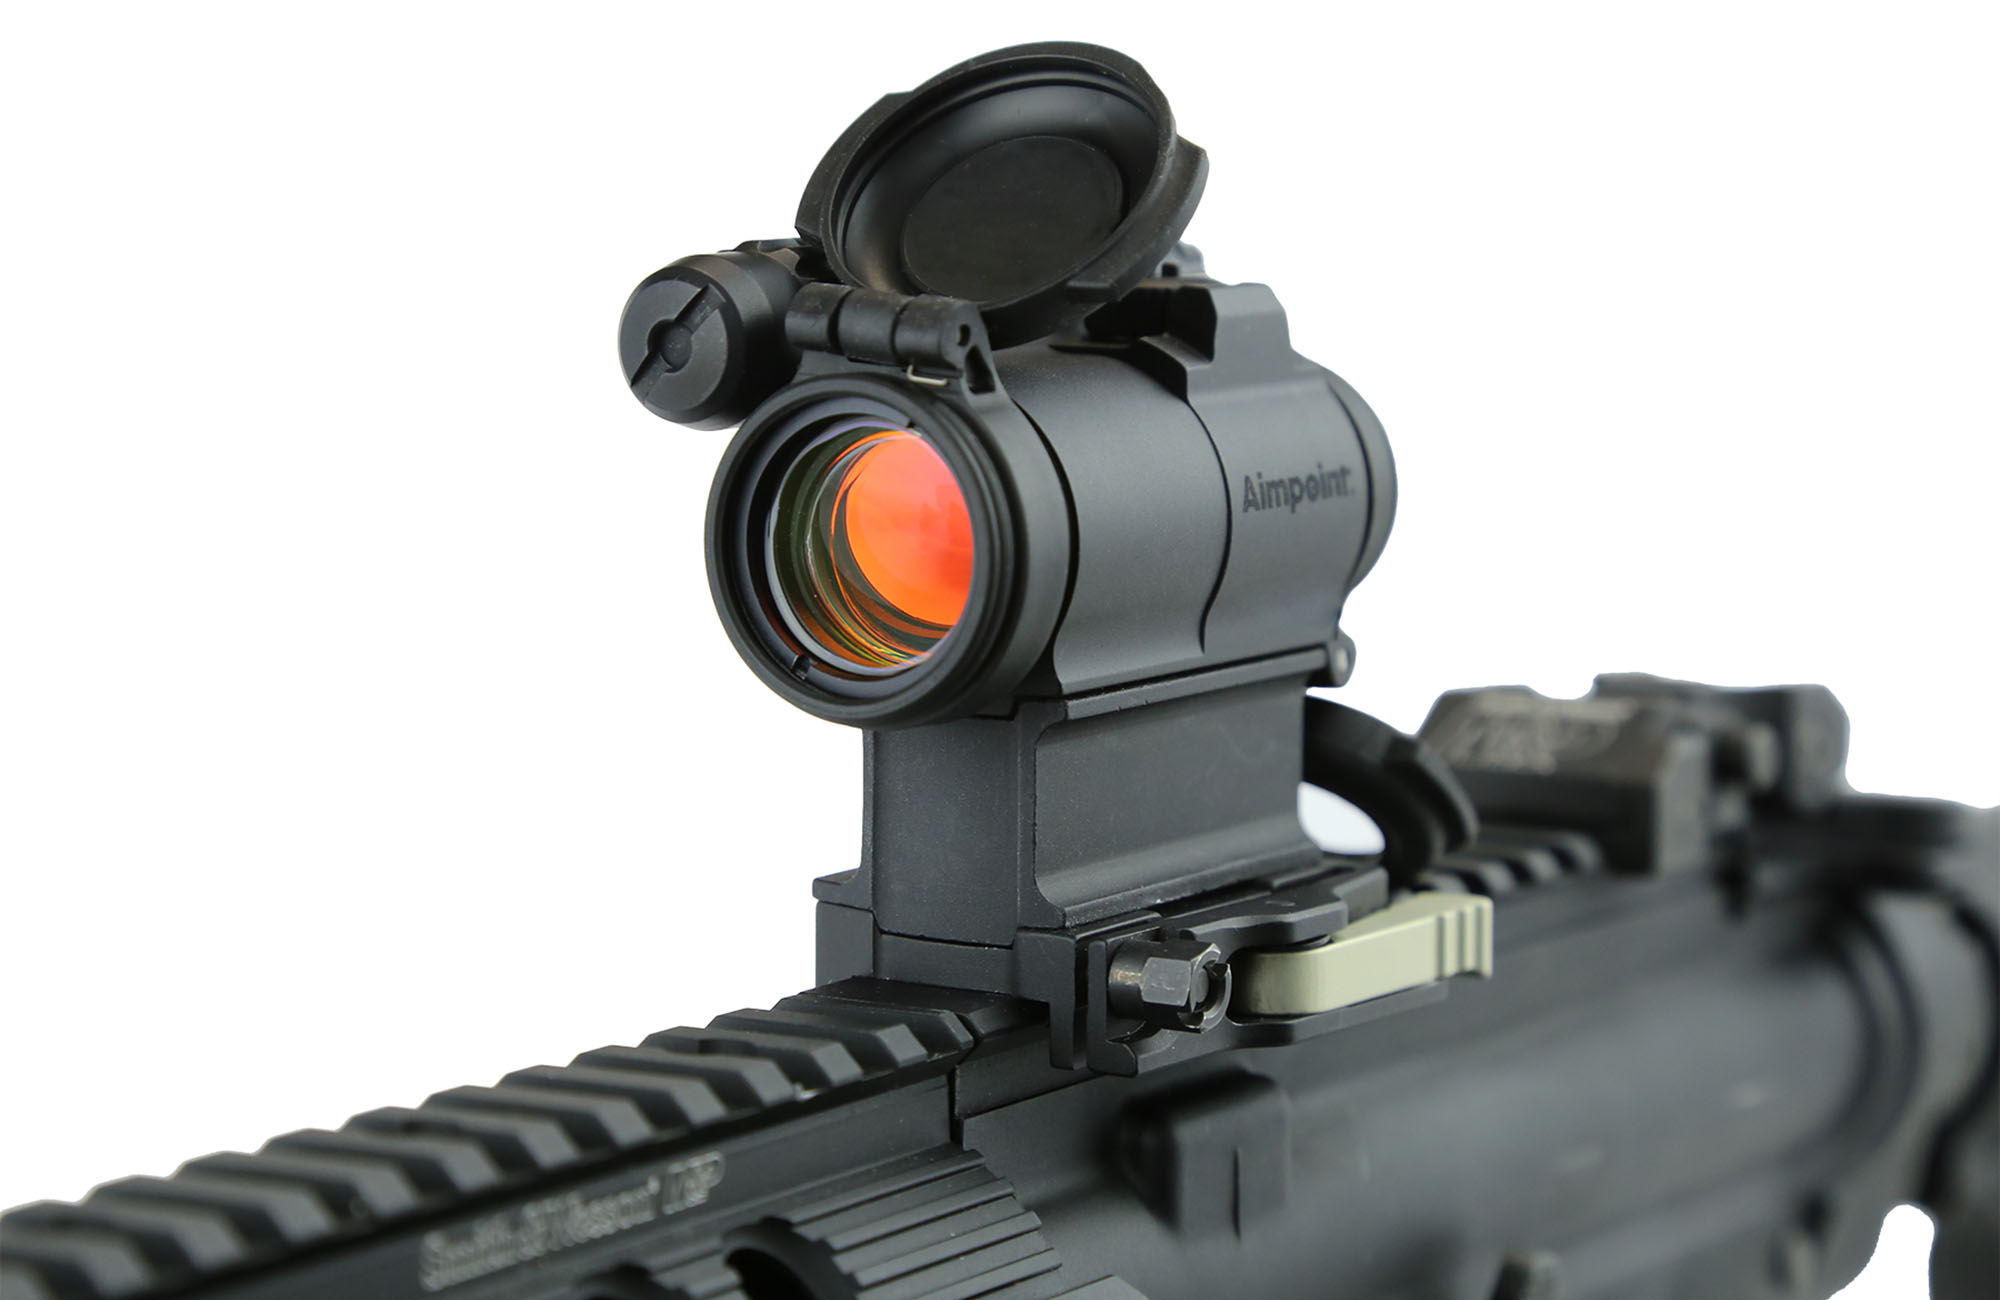 Прицелы aimpoint. Коллиматорный прицел Aimpoint. Aimpoint Comp m5 Sight. Коллиматорный прицел Air point. Прицел коллиматорный m1 Red Dot.